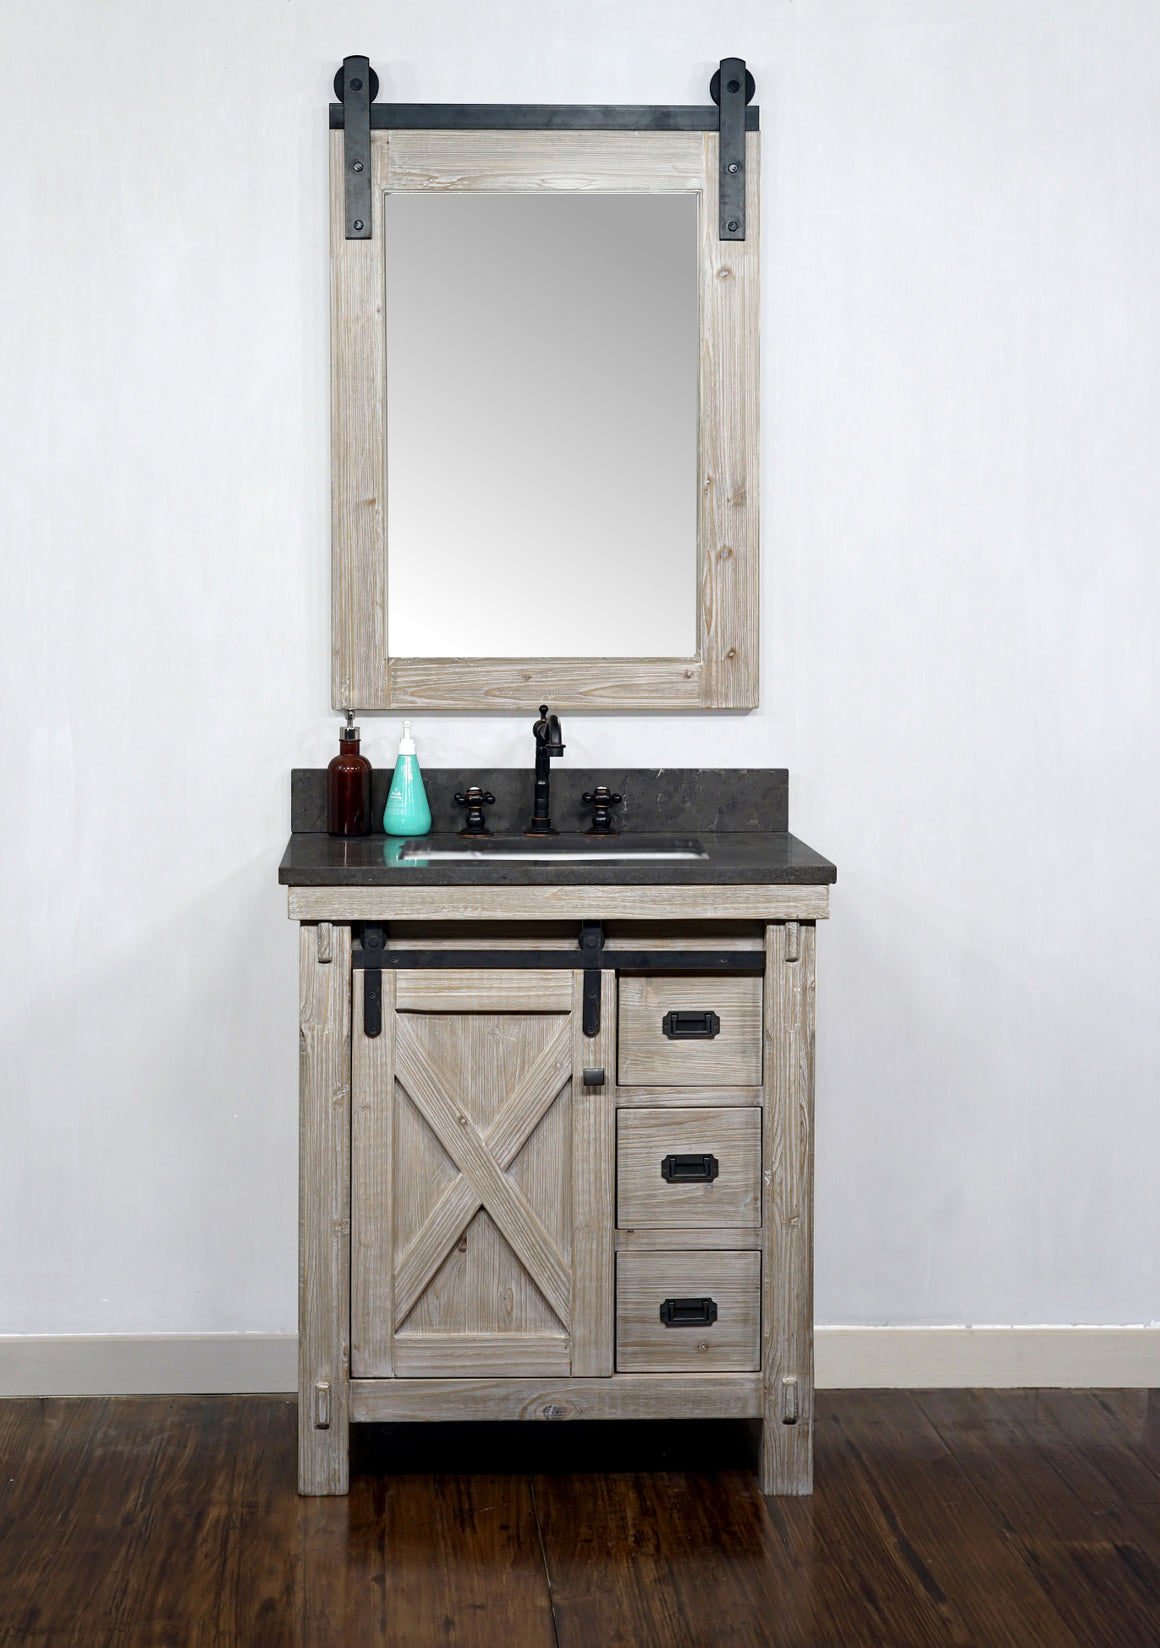 30"RUSTIC SOLID FIR BARN DOOR STYLE SINGLE SINK VANITY WITH LIMESTONE TOP WITH RECTANGULAR SINK-NO FAUCET